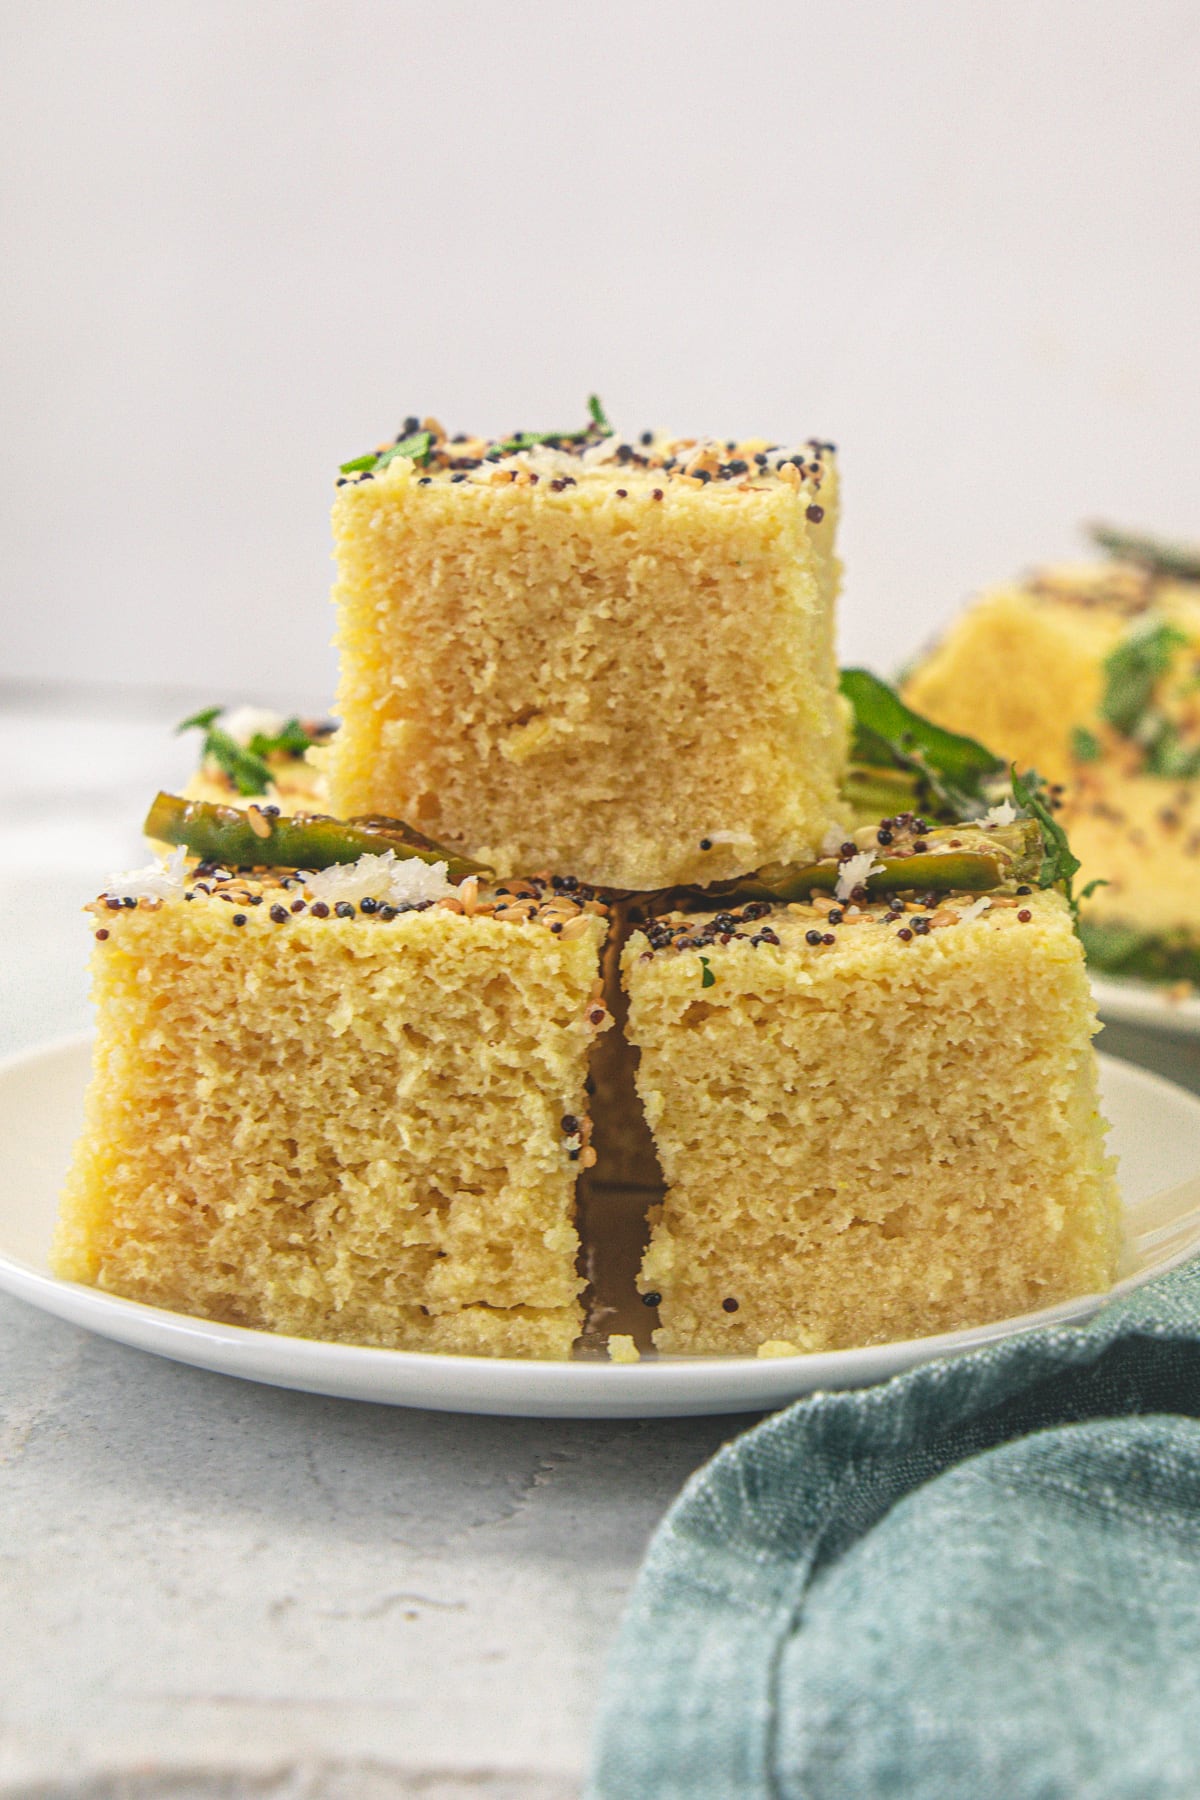 A stack of 3 khaman dhokla in a plate.